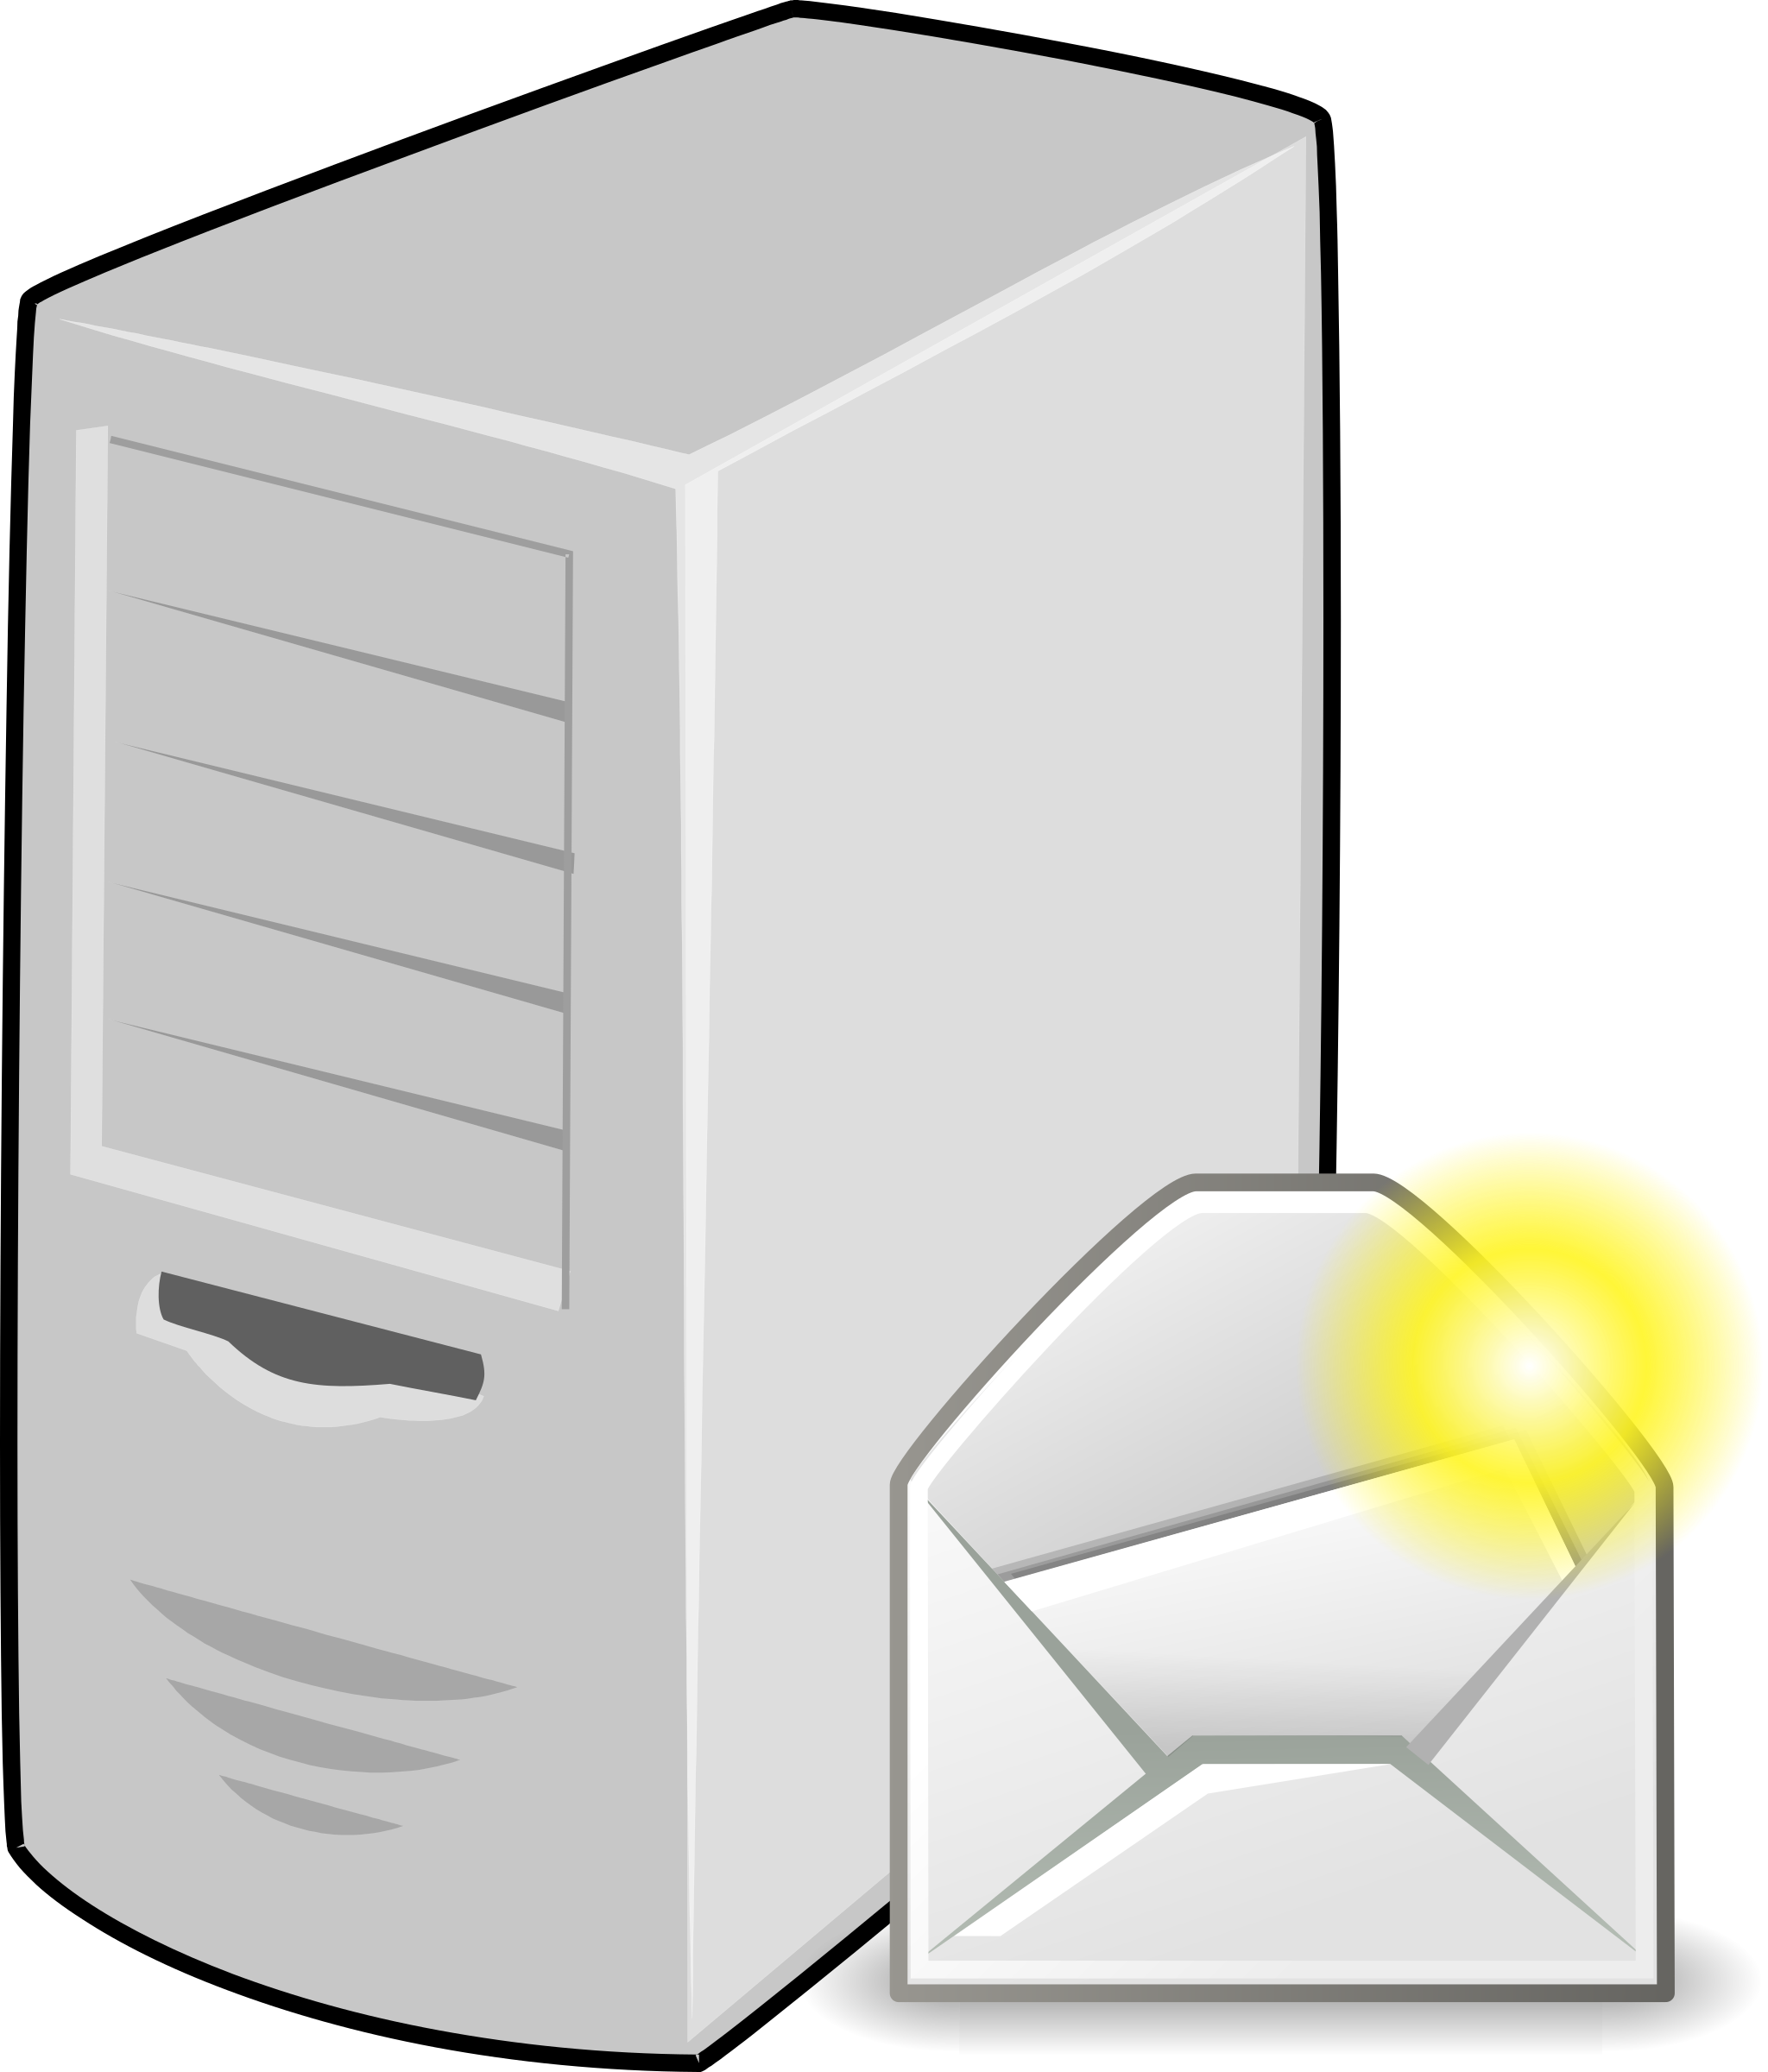 E-mail Server PNG Image